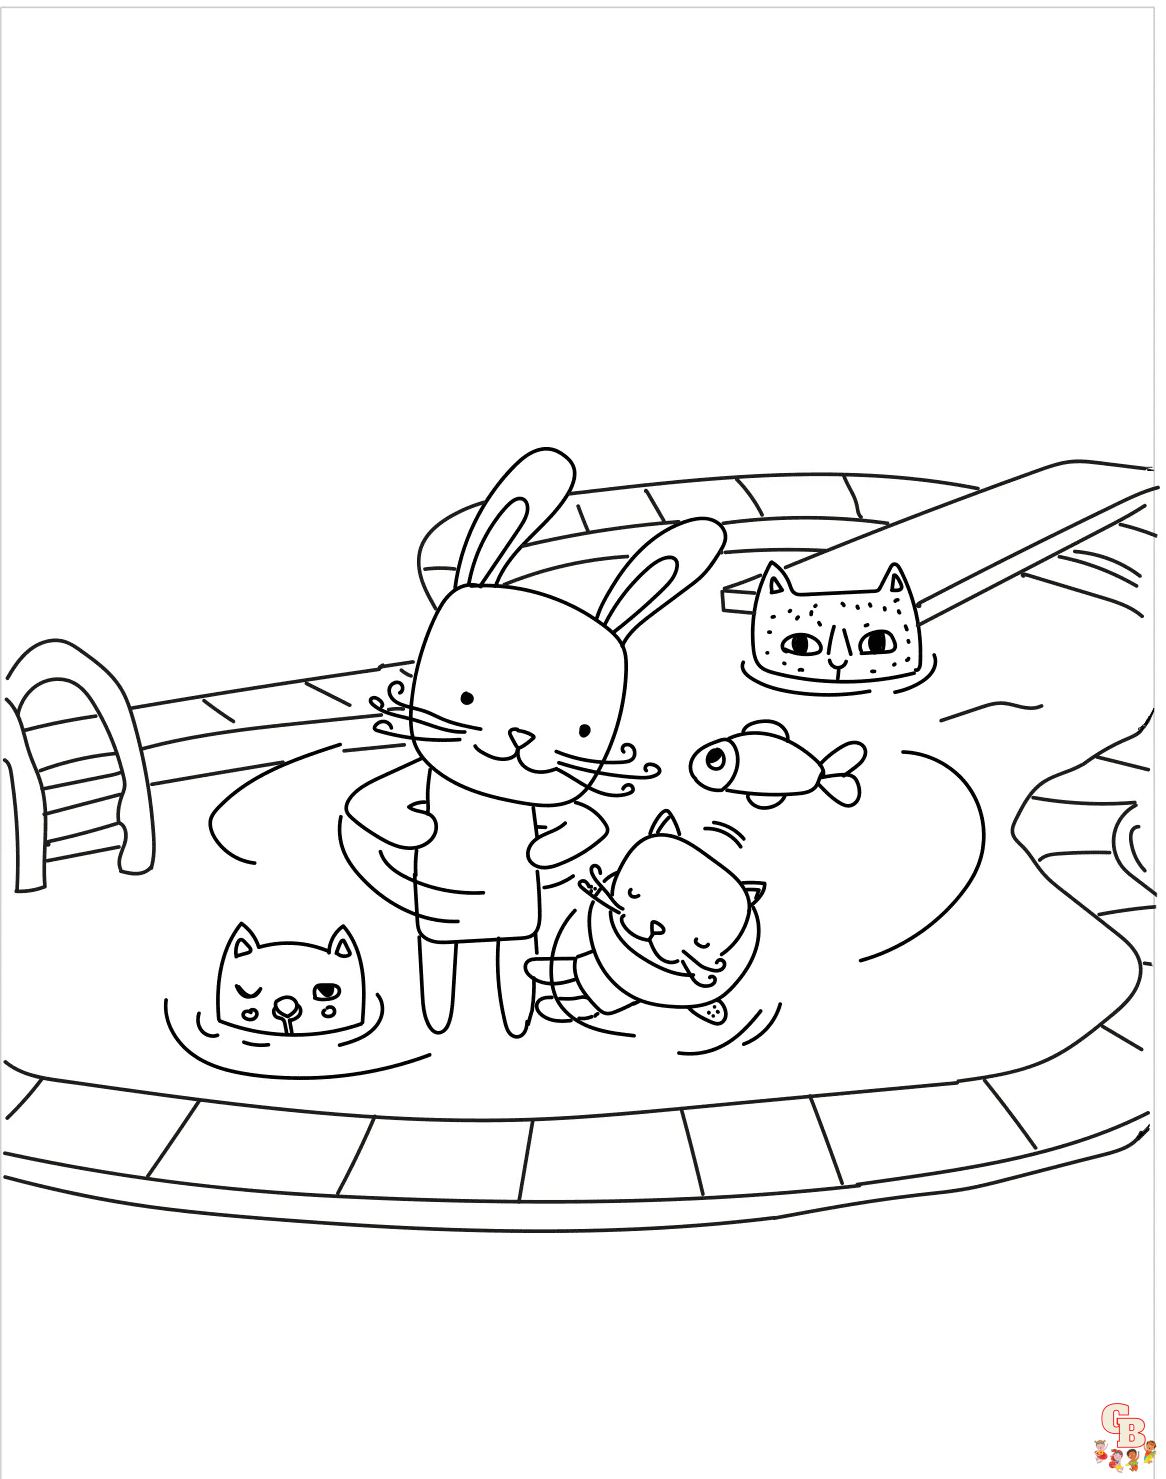 Dive into fun with swimming pool coloring pages